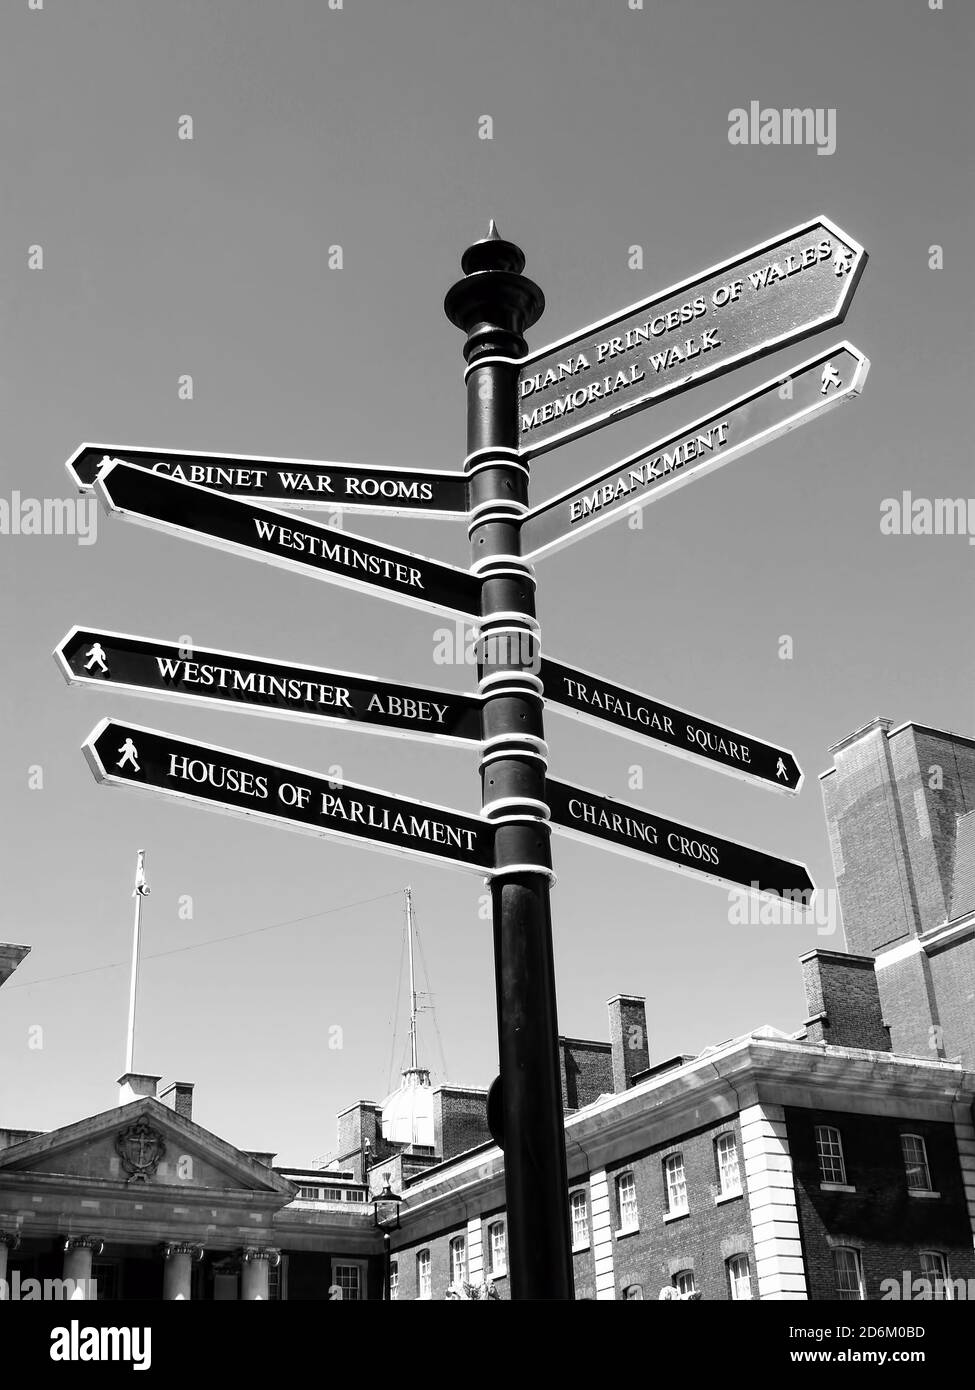 London retro street signpost giving directions to some of the most famous landmark attractions monochrome image Stock Photo